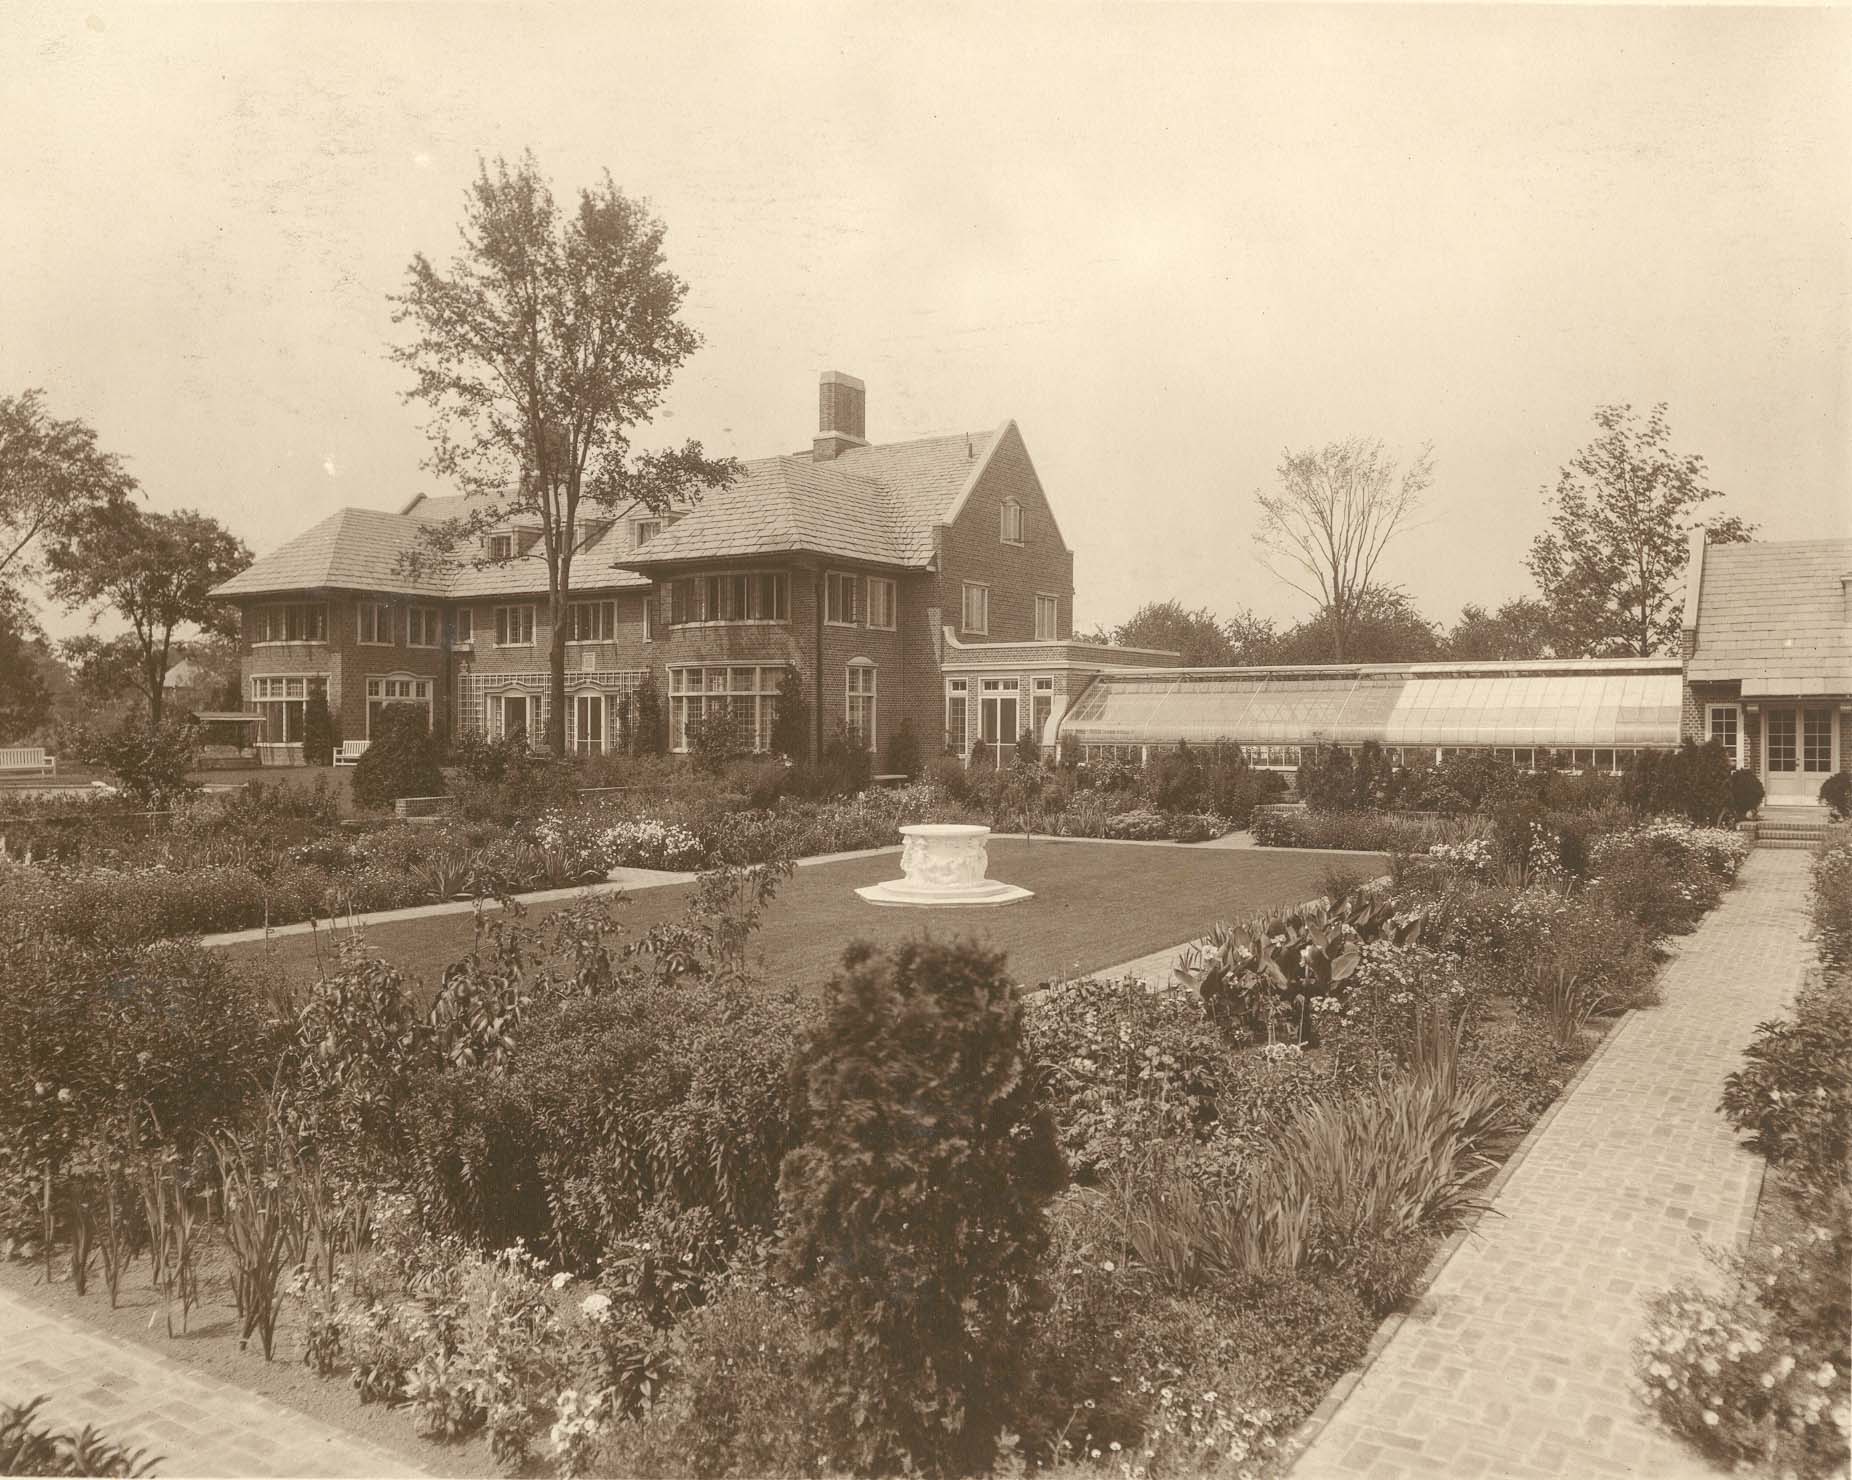 https://www.ruthmottfoundation.org/wp-content/uploads/2022/06/applewood-estate-with-gardens-and-greenhouse.jpg